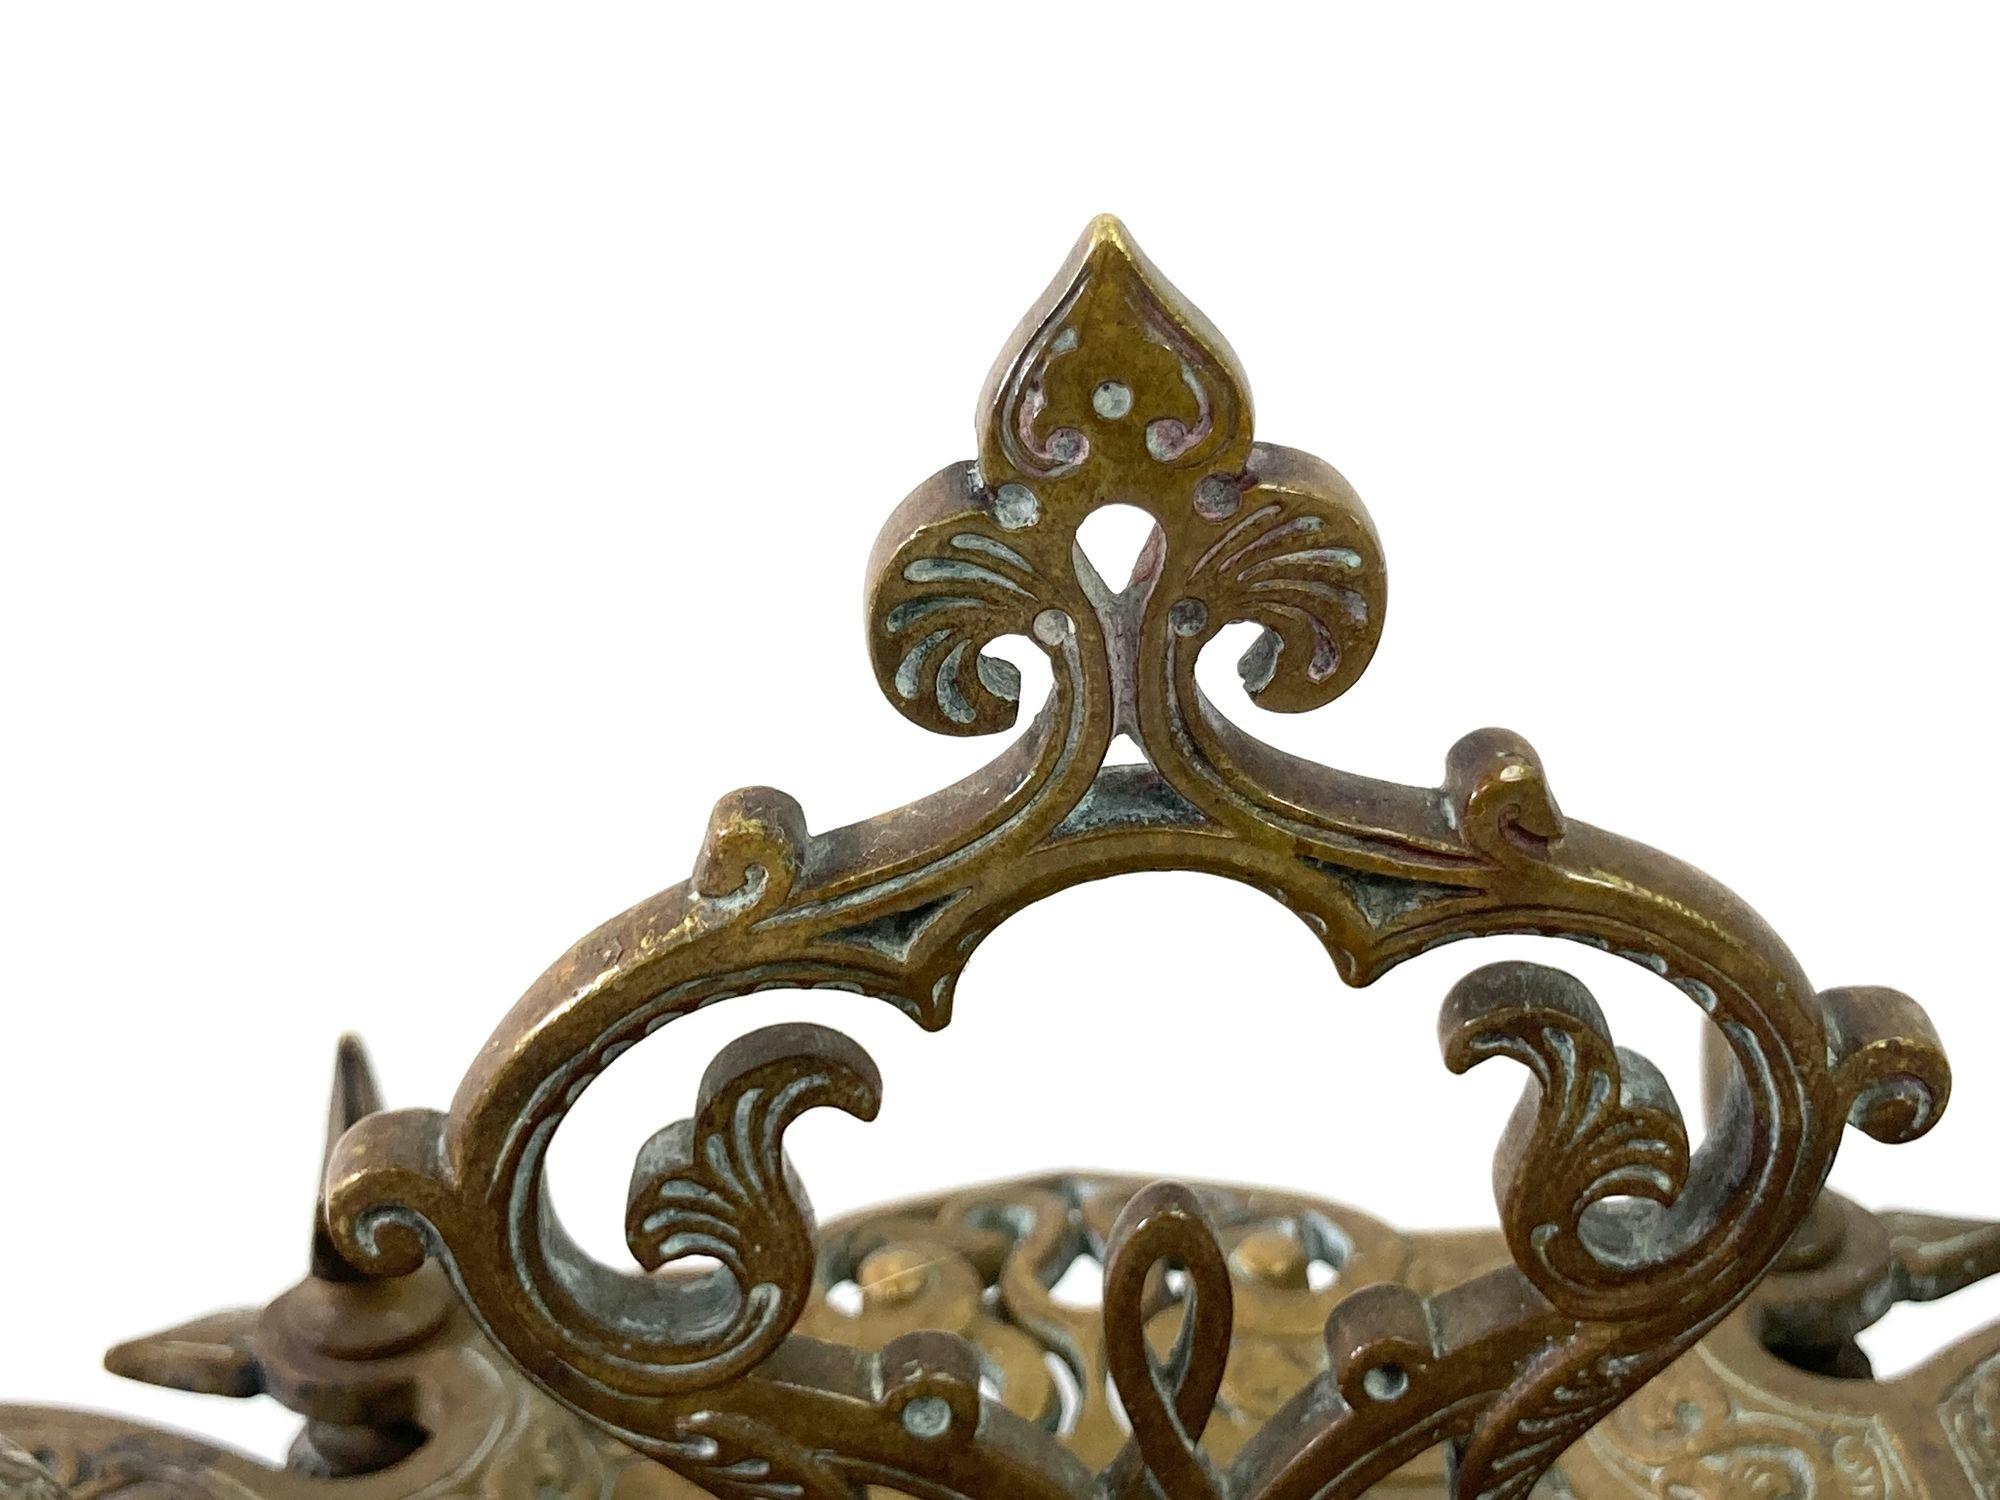 20th Century French Art Nouveau Brass Footed Double Ink Well Filigree Bronze Moorish Style